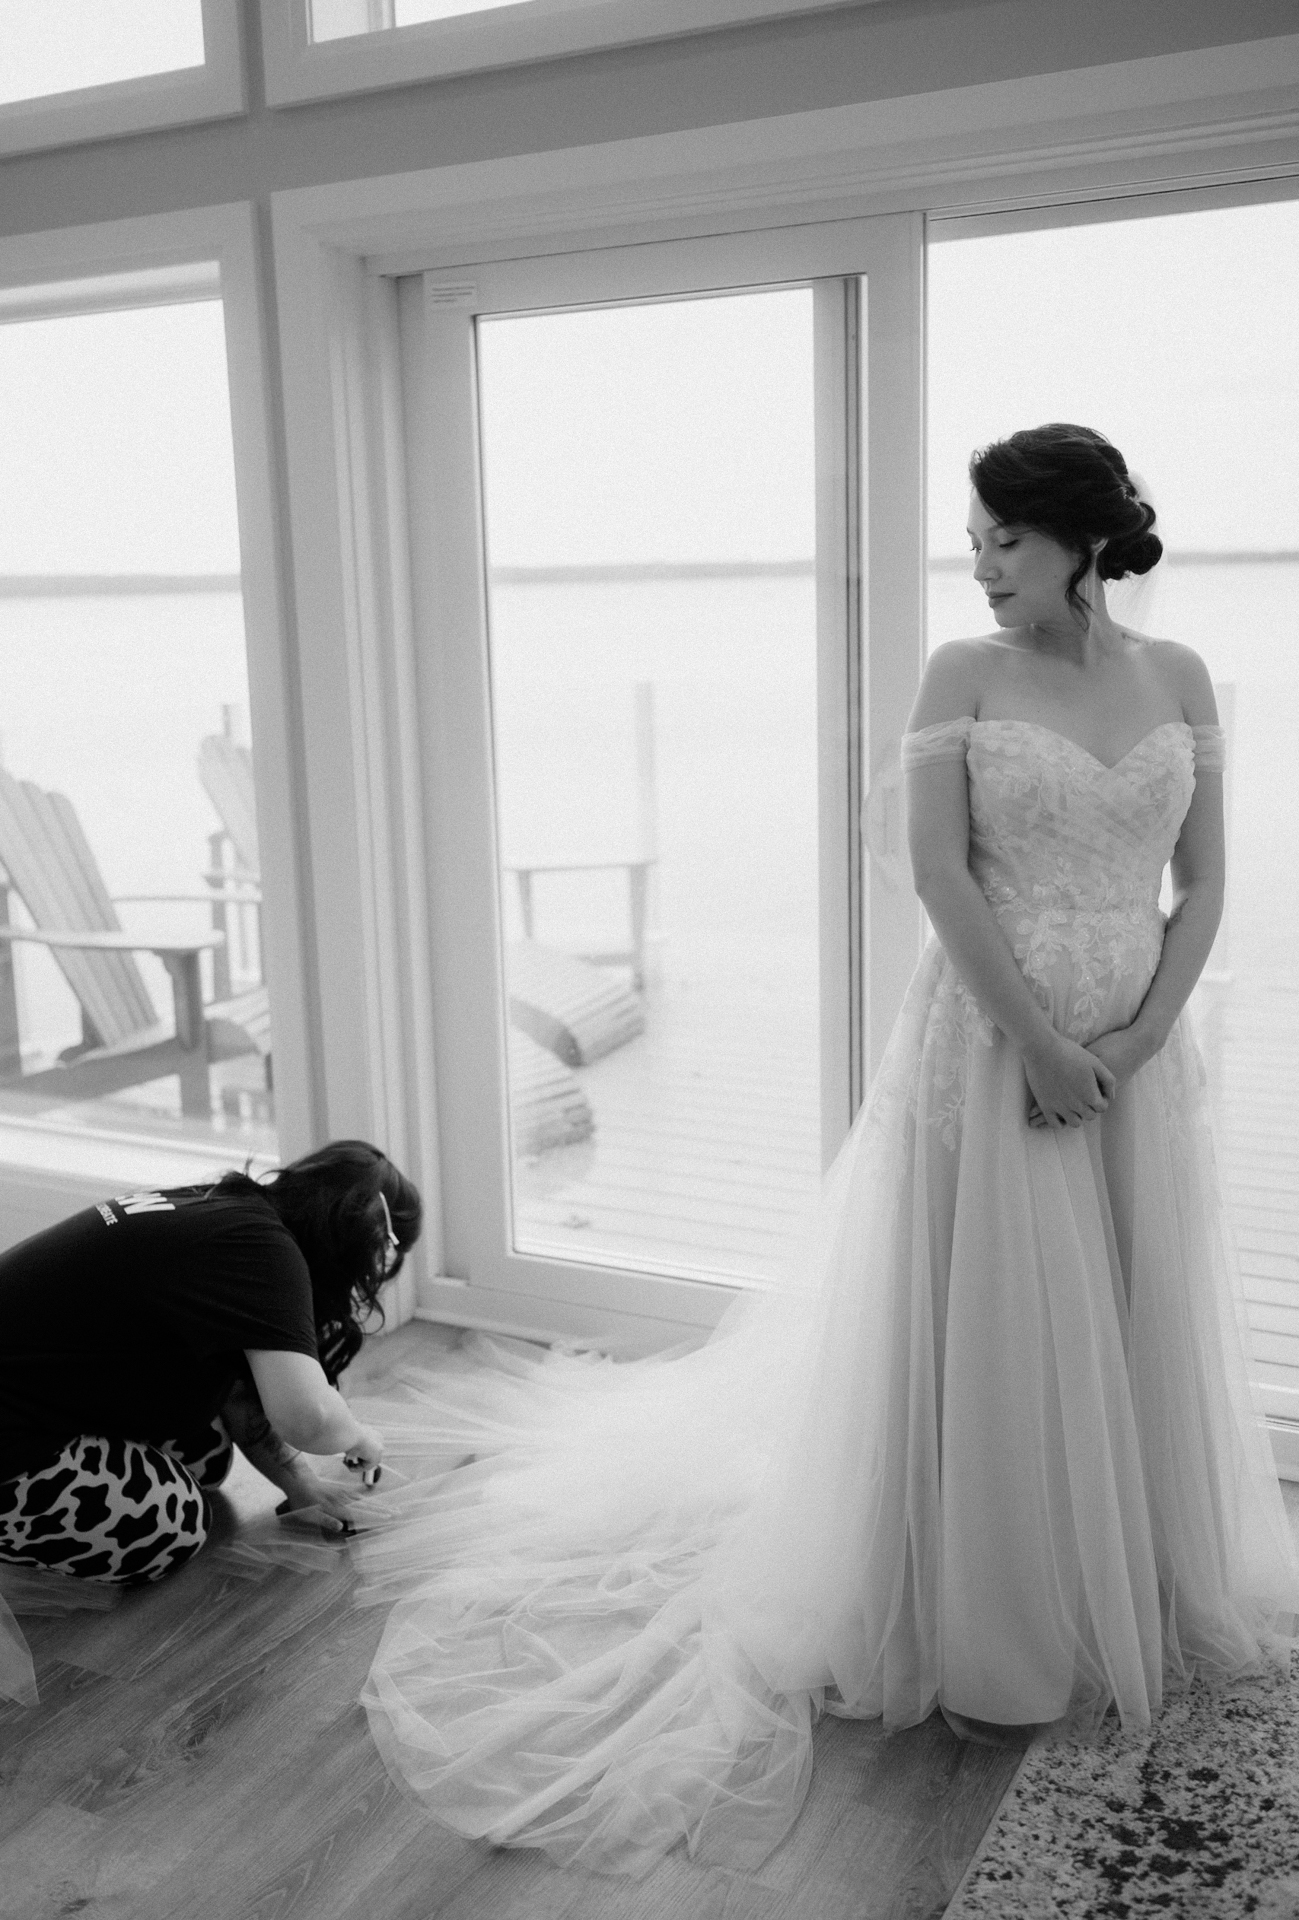 A bride stands near a window overlooking a lake while another person adjusts the train of her dress.